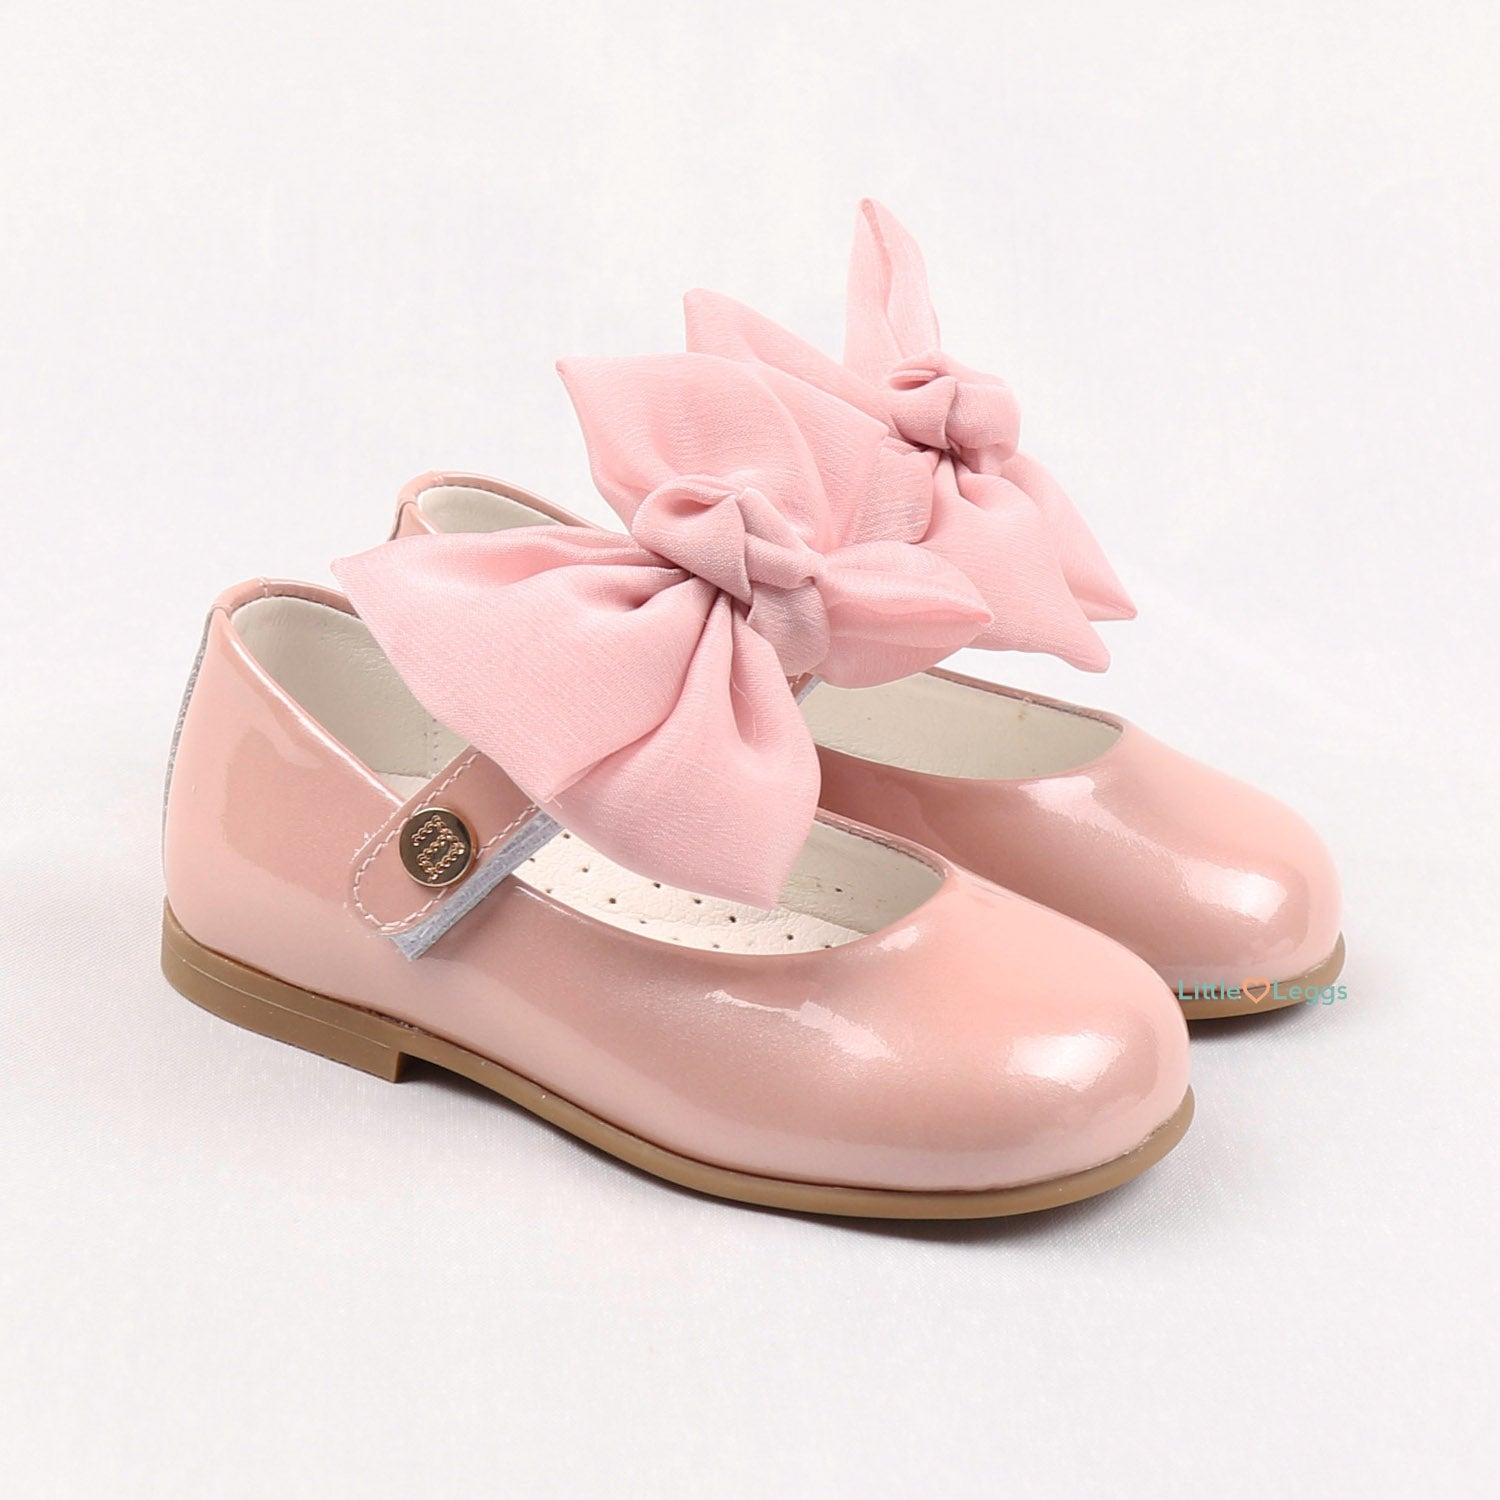 Dusty Pearl Pink Bow Mary Jane